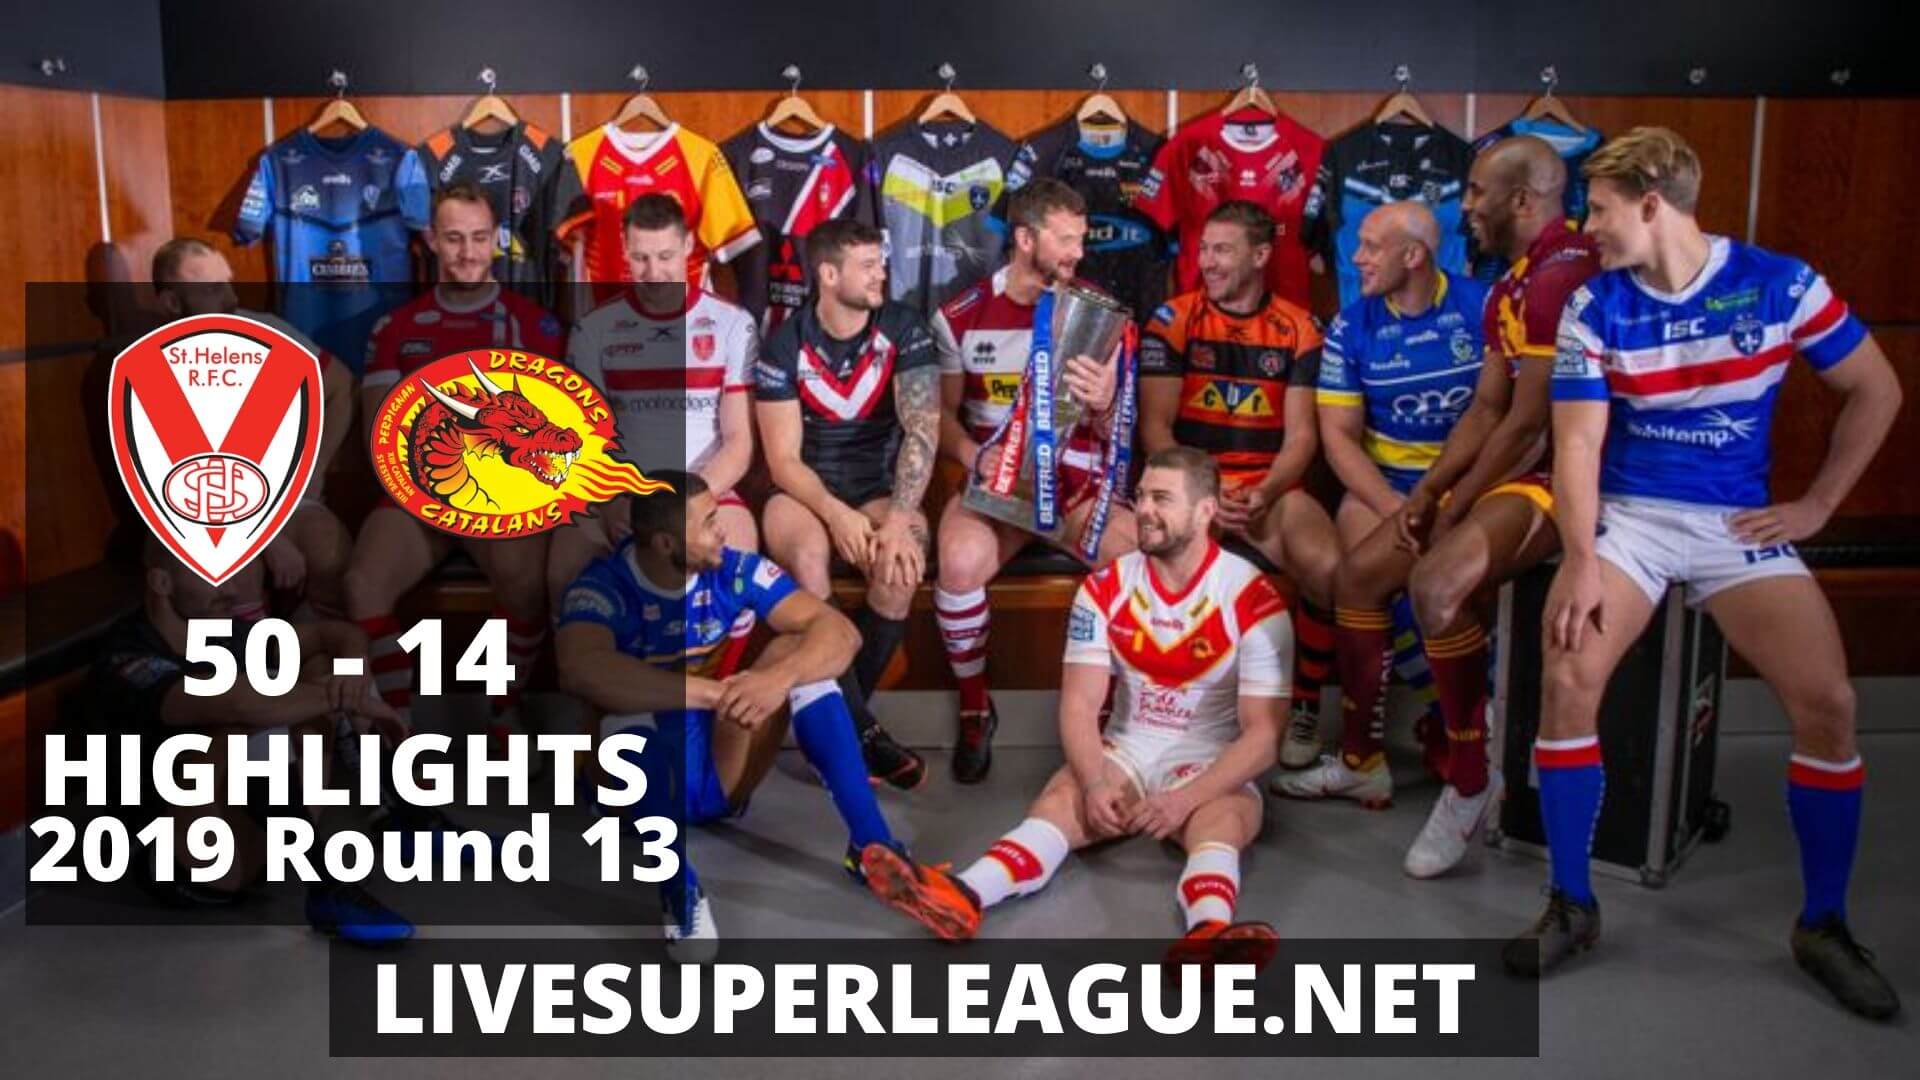 St Helens Vs Catalans Dragons Highlights 2019 Round 13